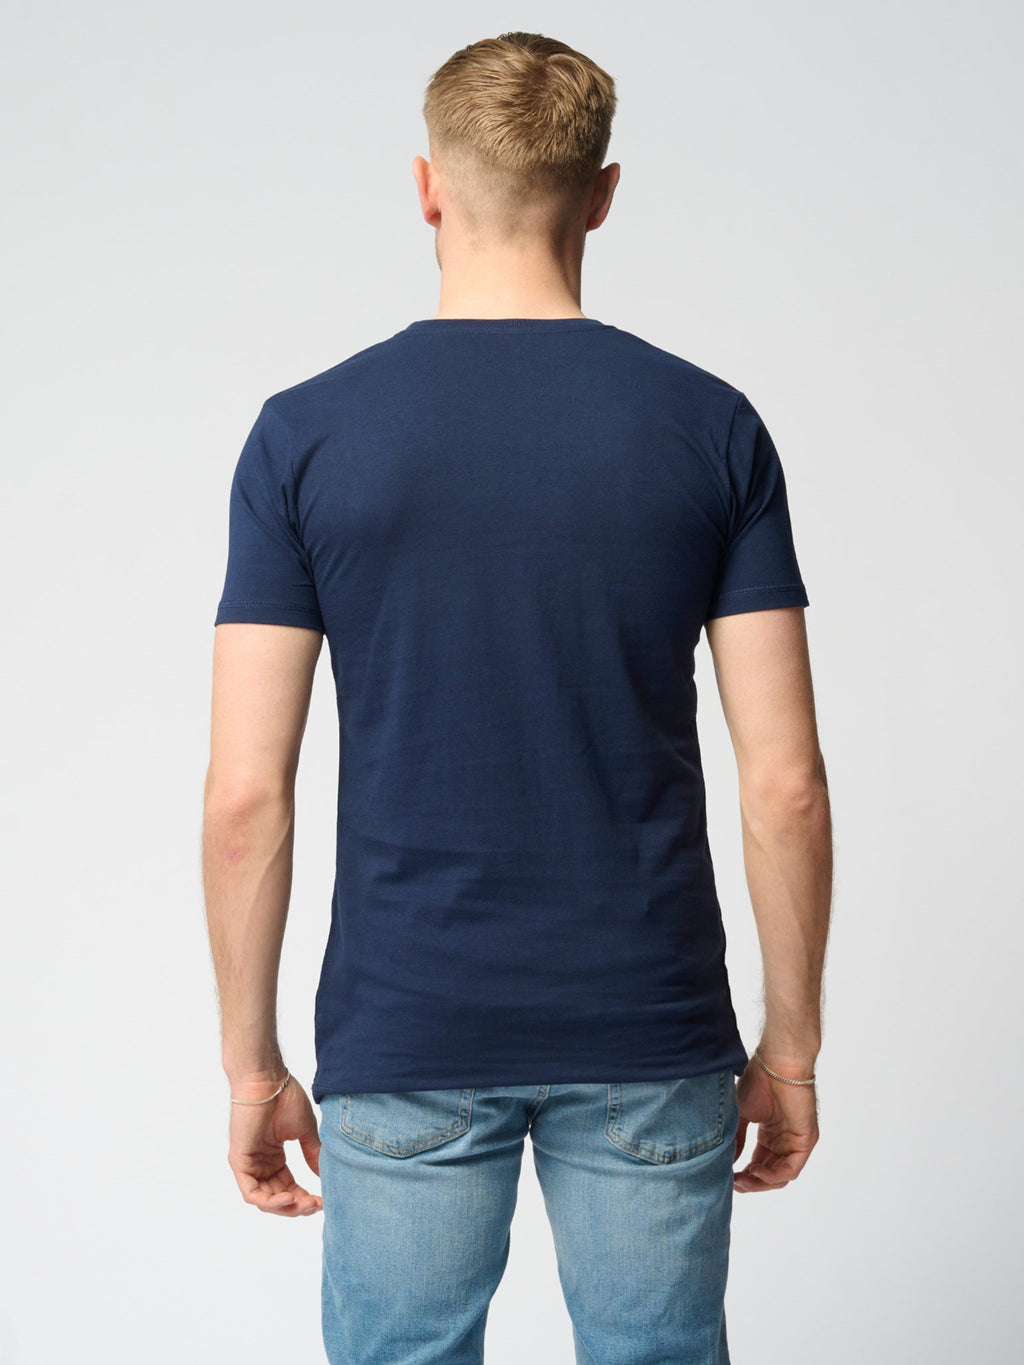 T-shirt musculaire - Marine